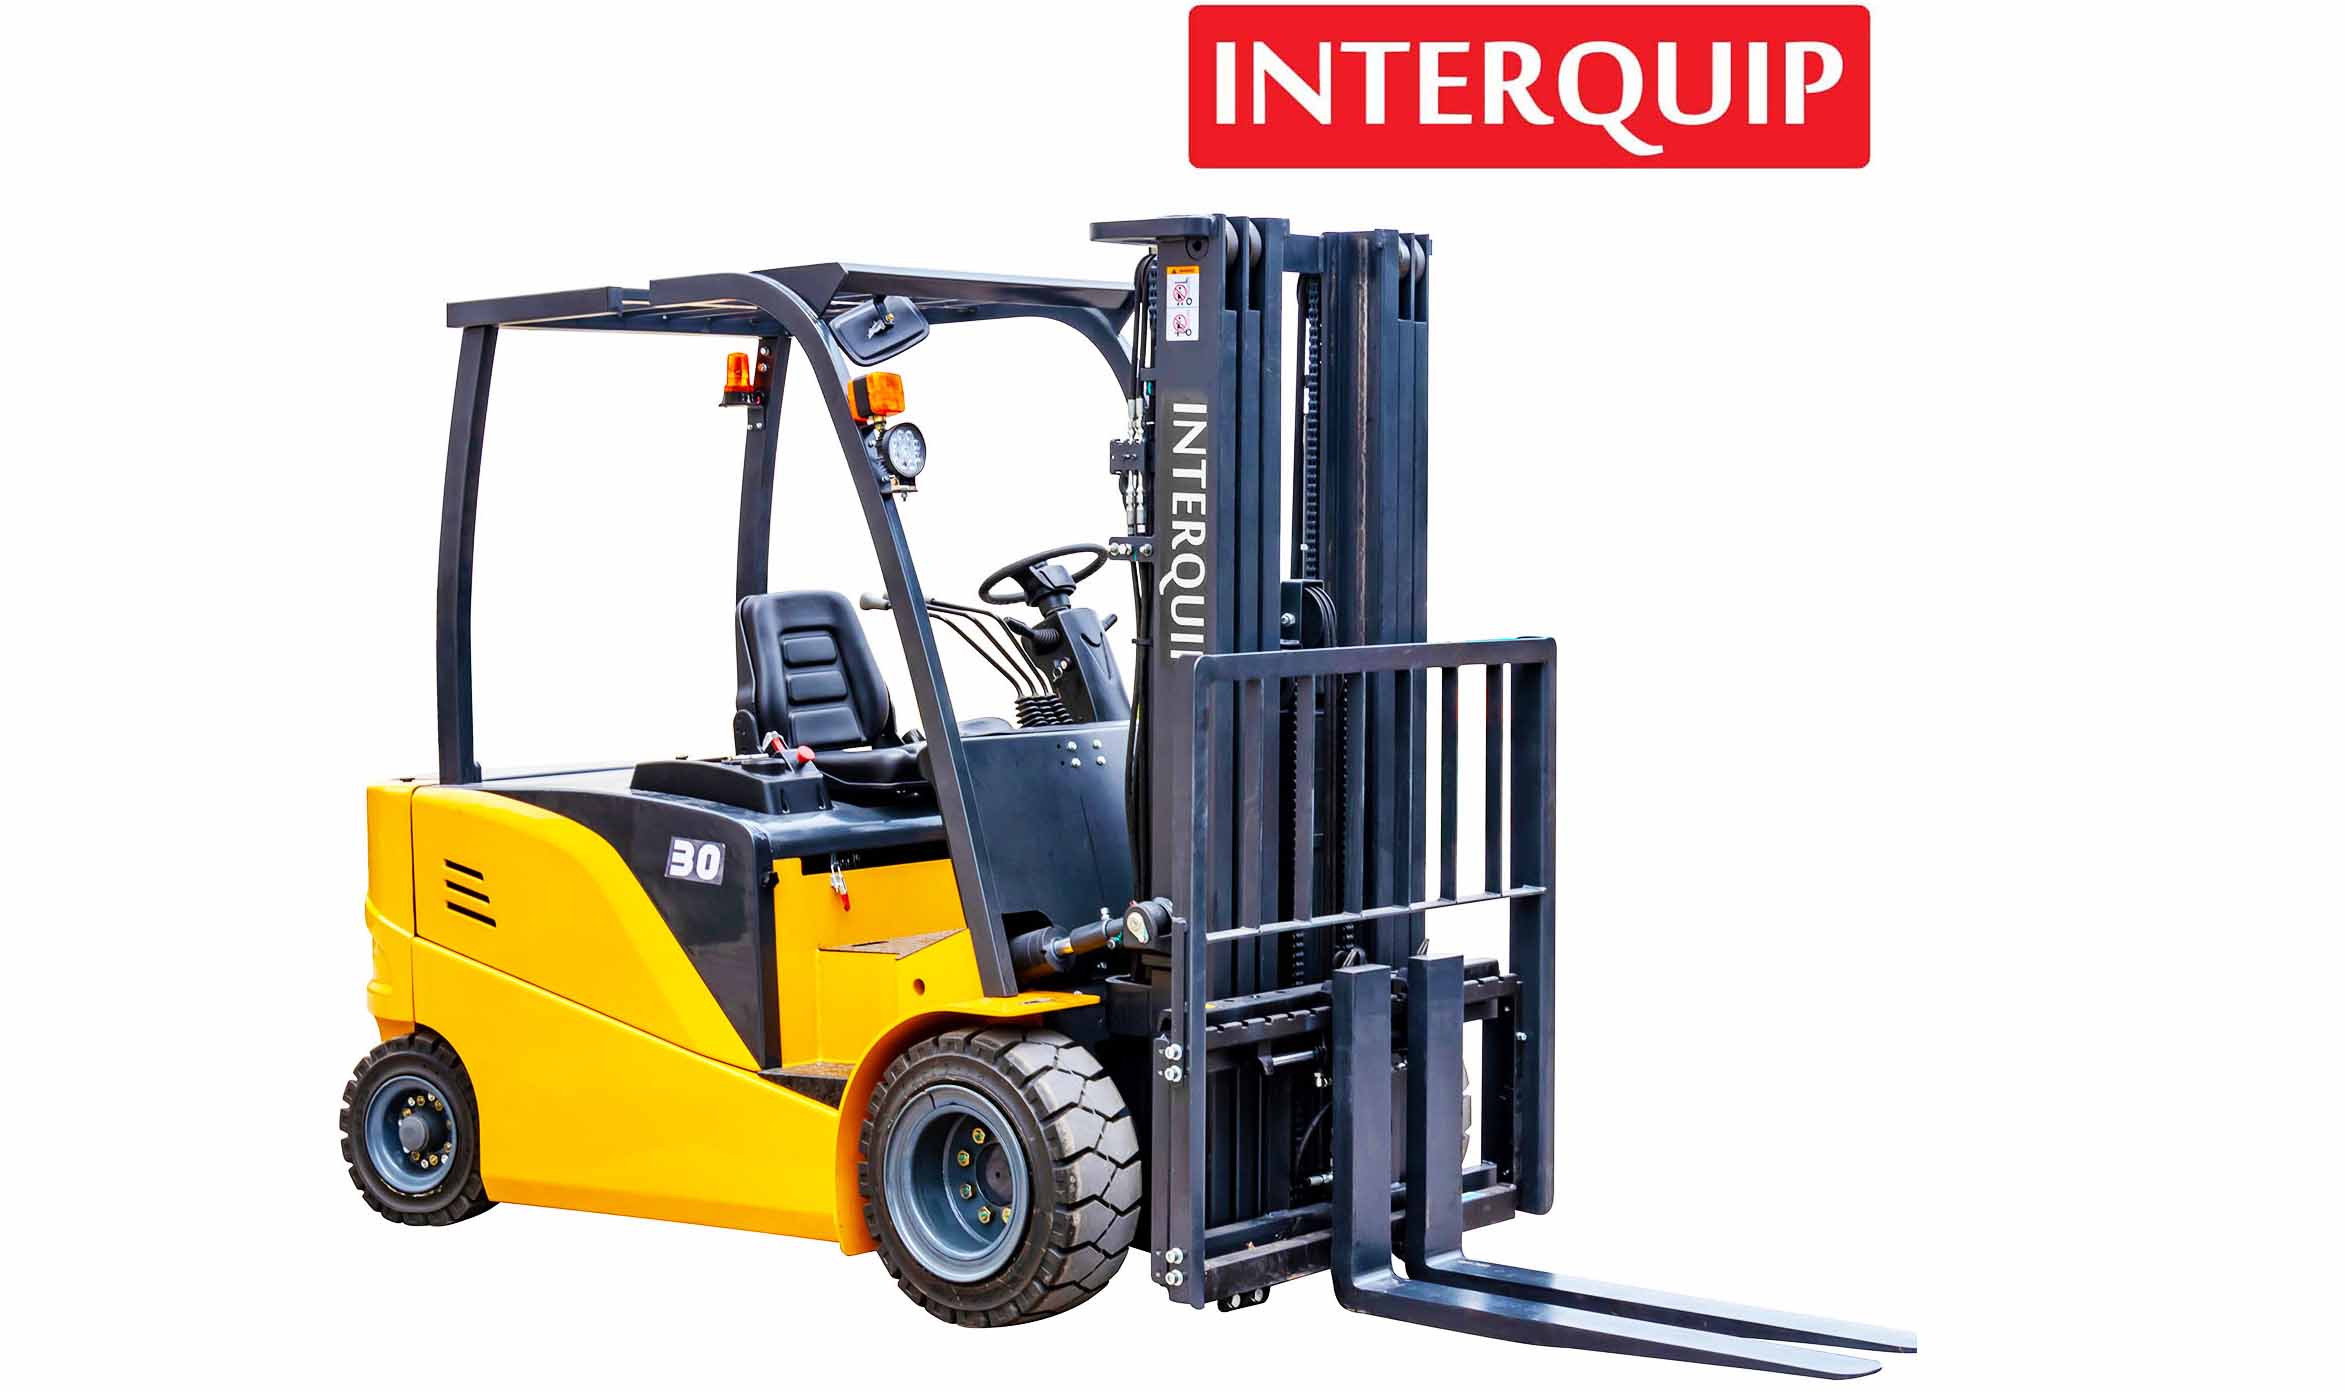 Maintenance of Forklifts in Warehouses